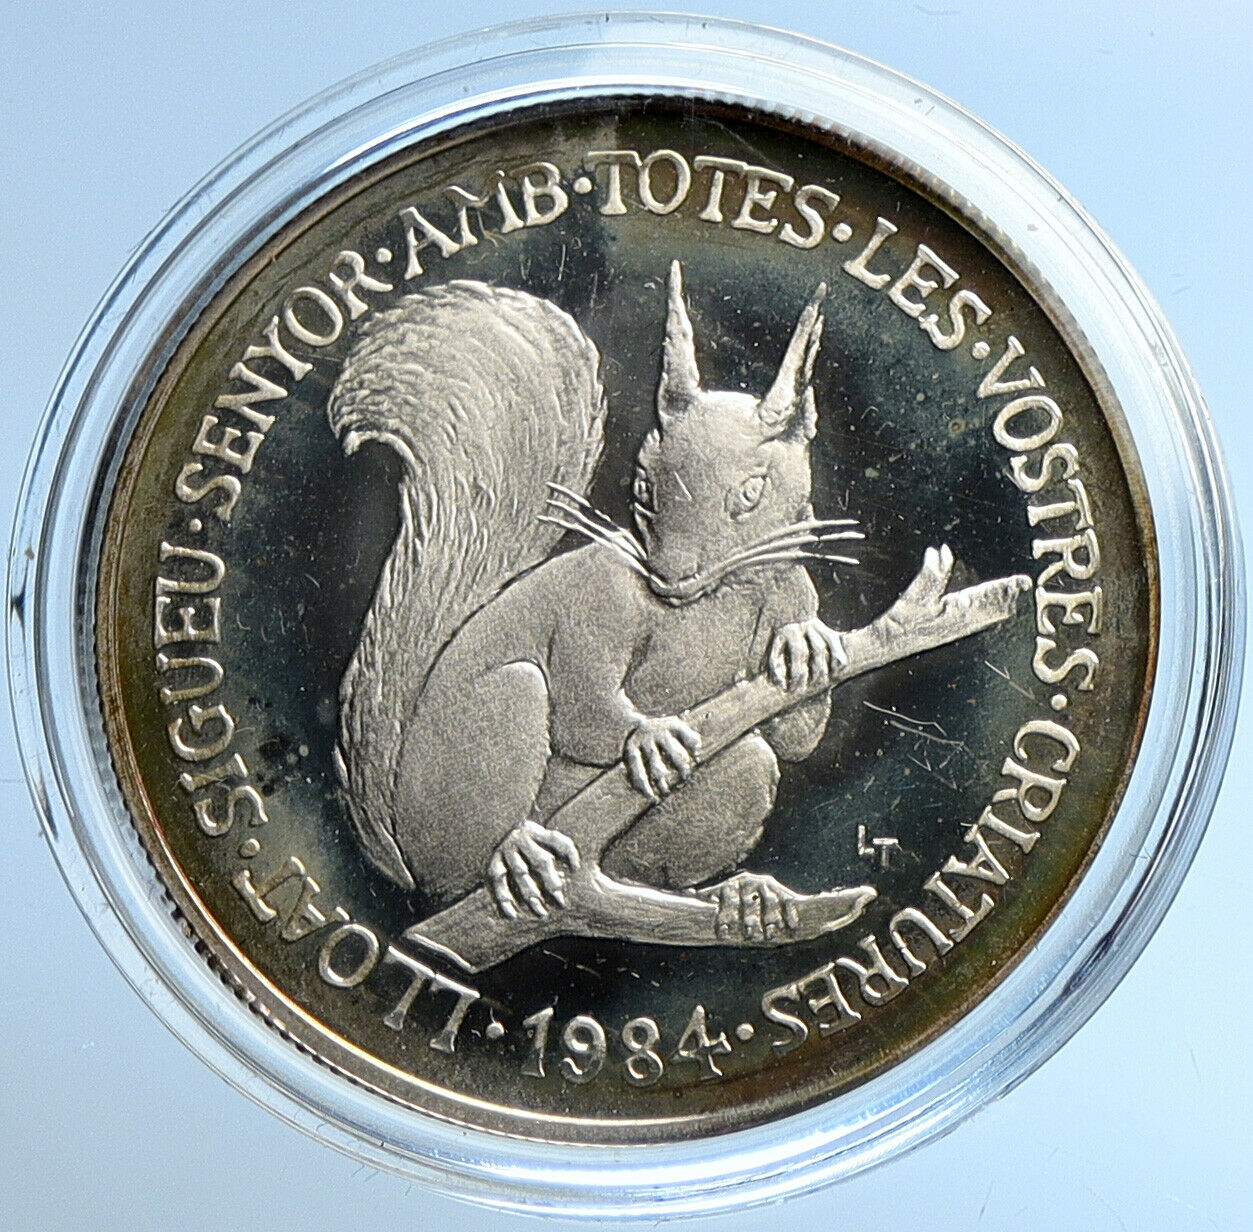 1984 ANDORRA Wildlife RED SQUIRREL Coat Arms Proof Silver 20 Diners Coin i109684